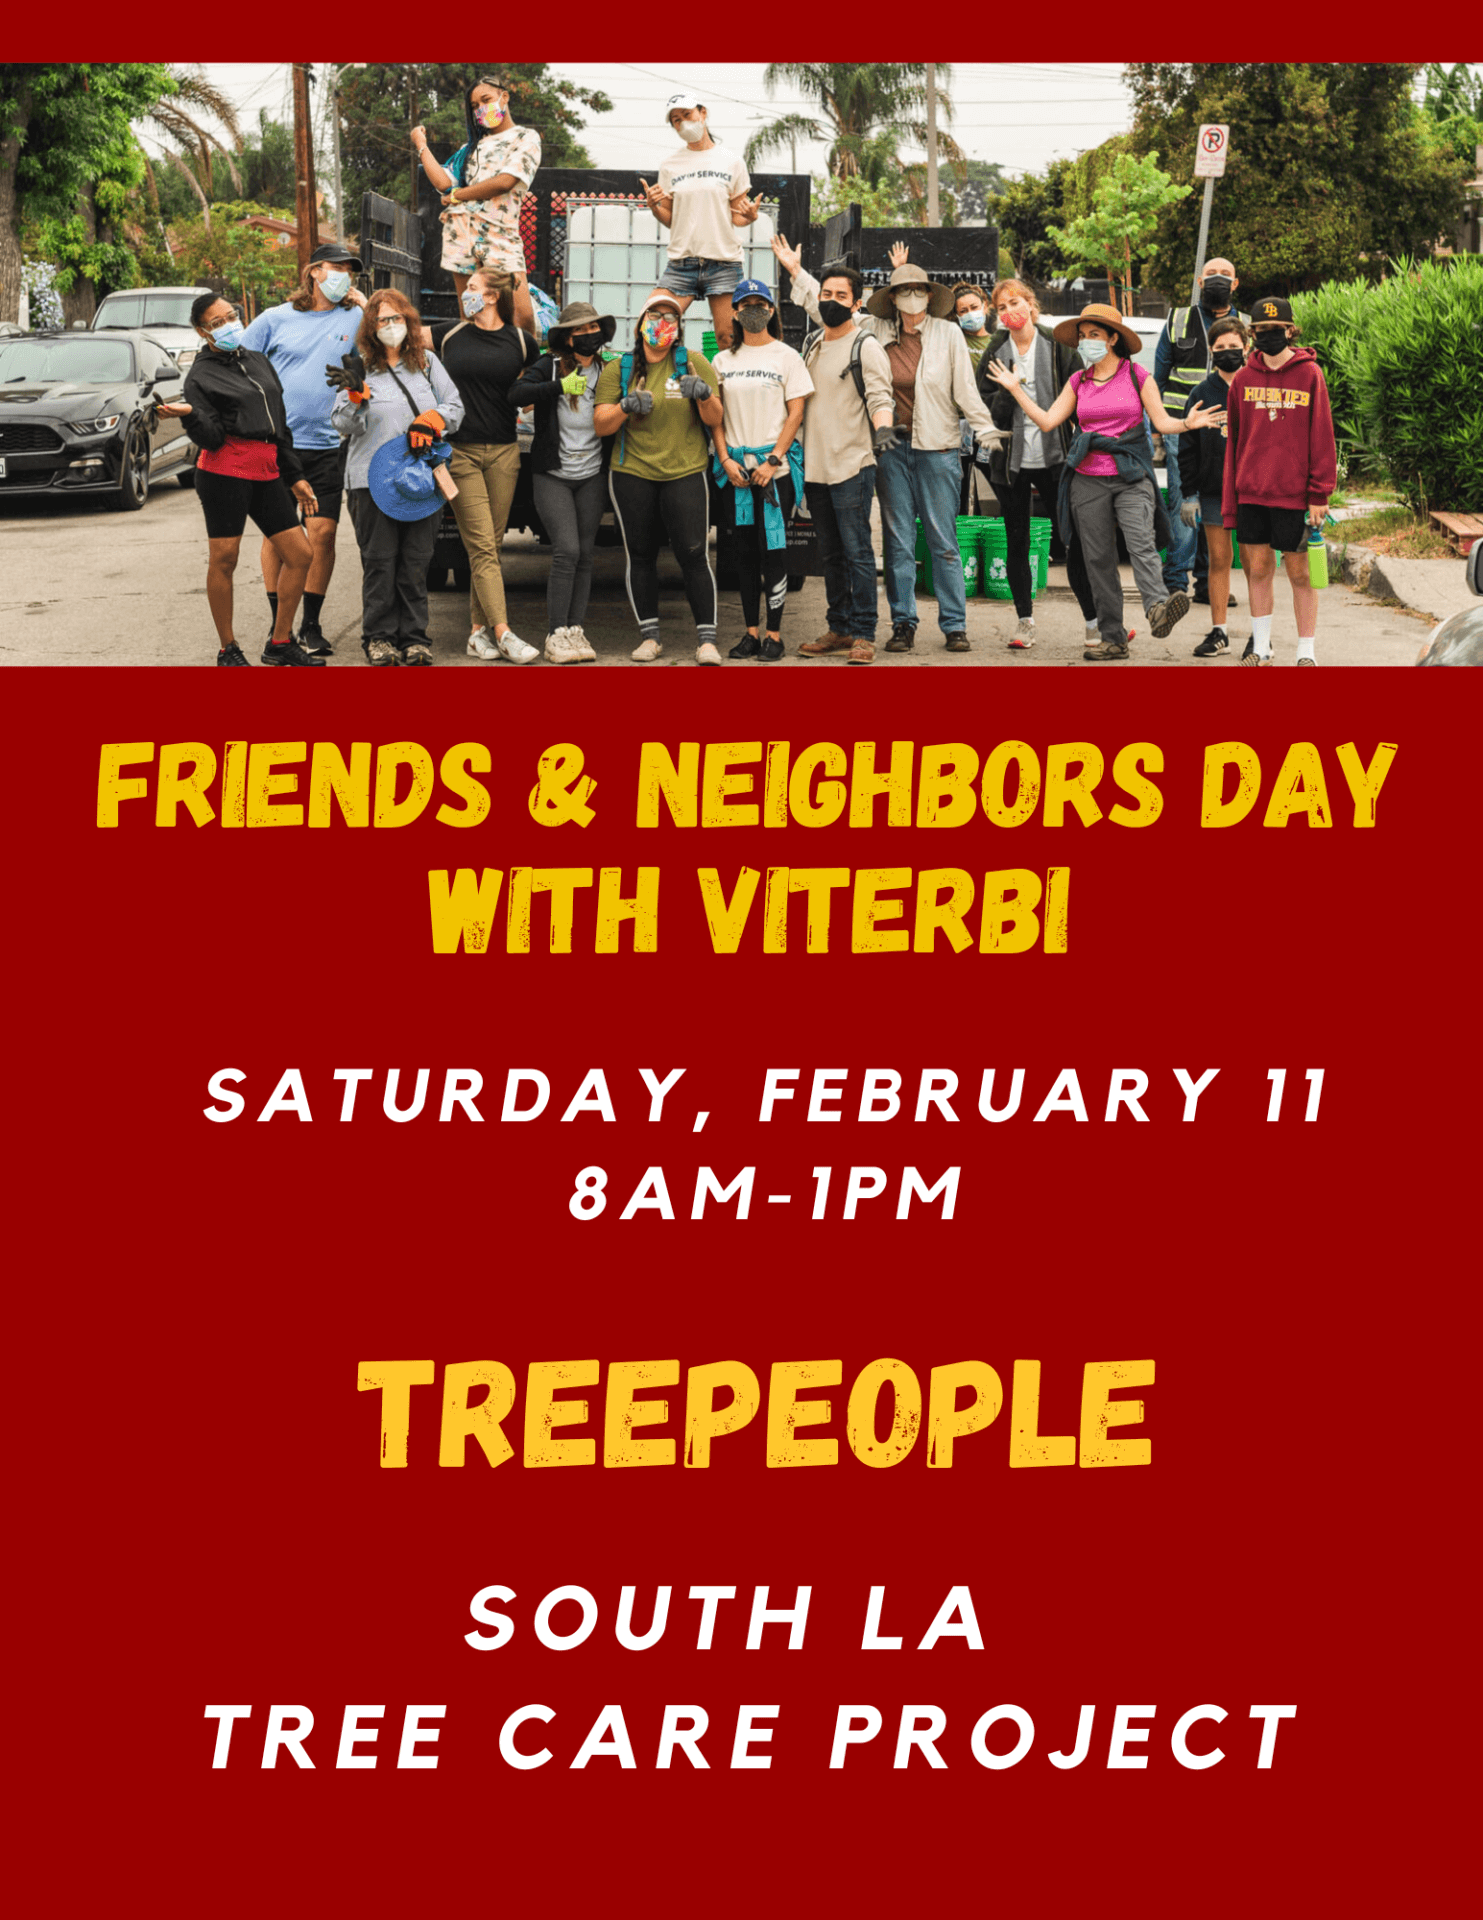 Featured image for “Friends & Neighbors Day with Viterbi!”